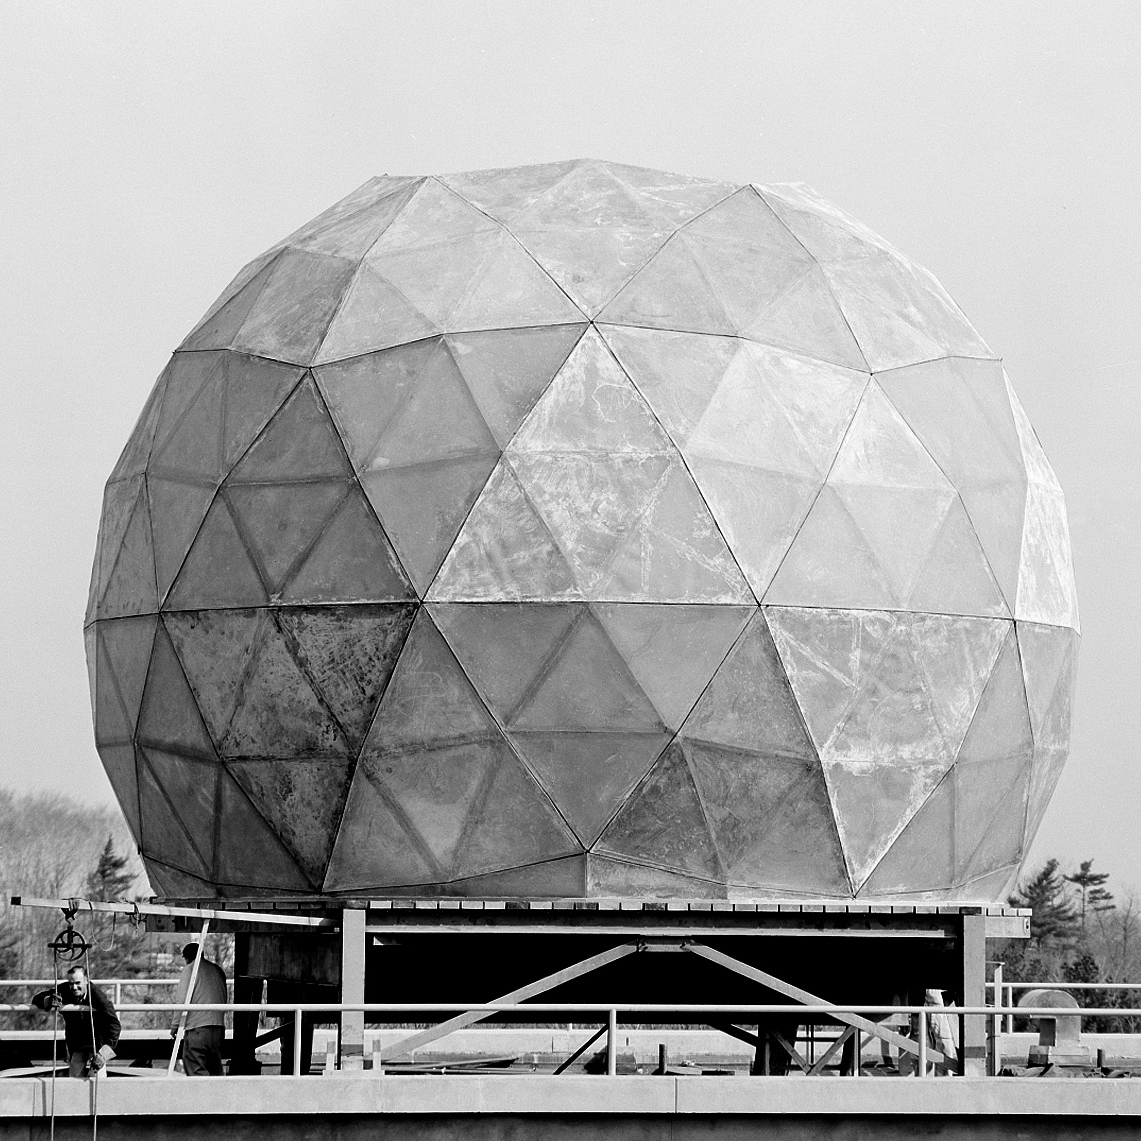 Geodesic radome, first developed at Lincoln Laboratory for DEW Line radars.